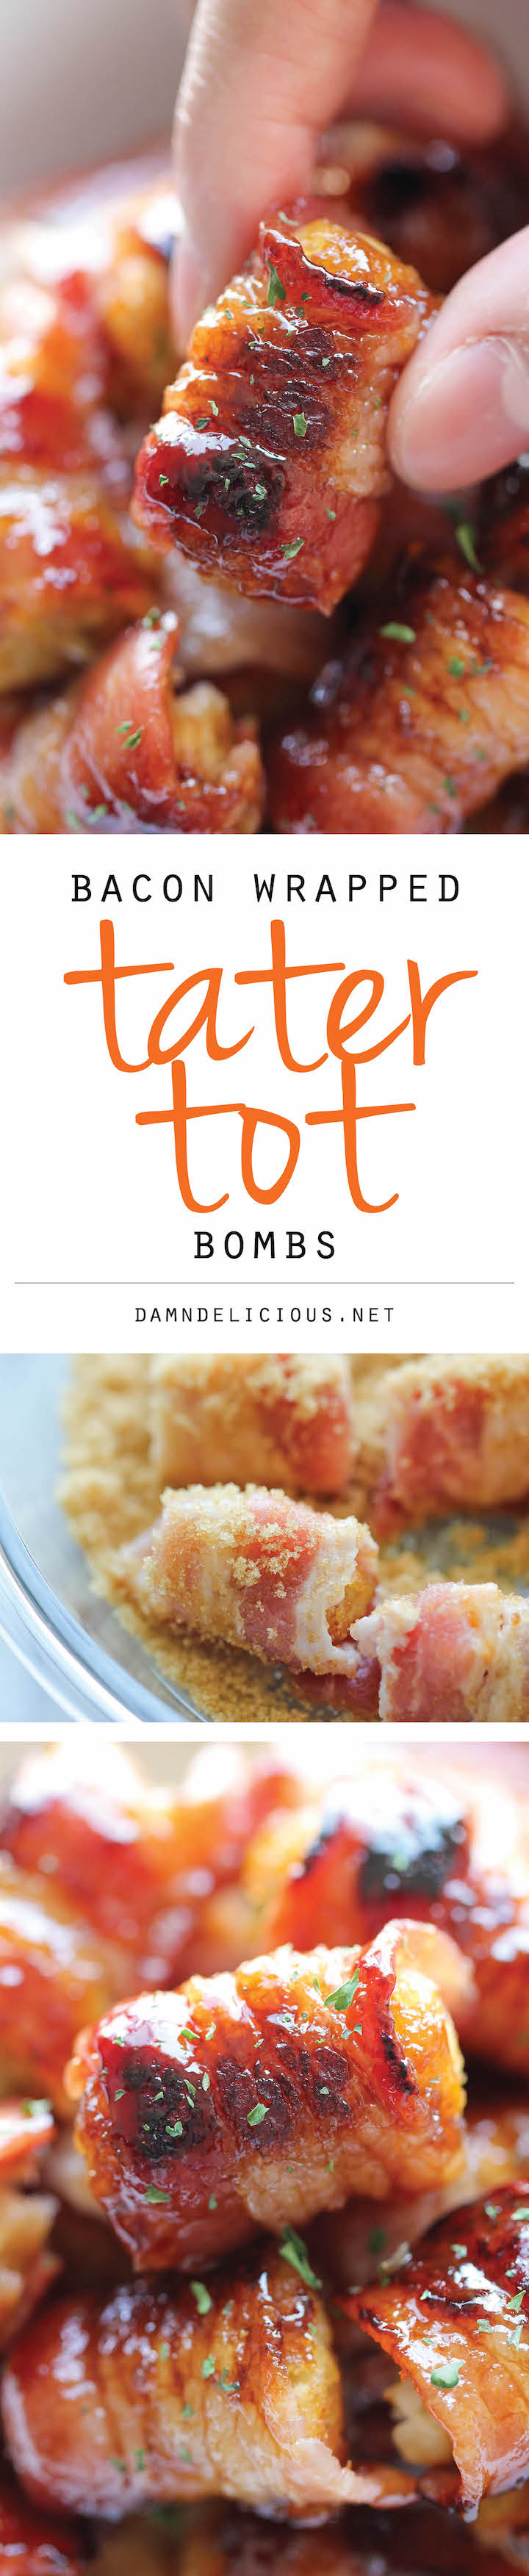 Bacon Wrapped Tater Tot Bombs - The most amazing tater tots ever. It's so good, you'll want to double or triple the recipe!